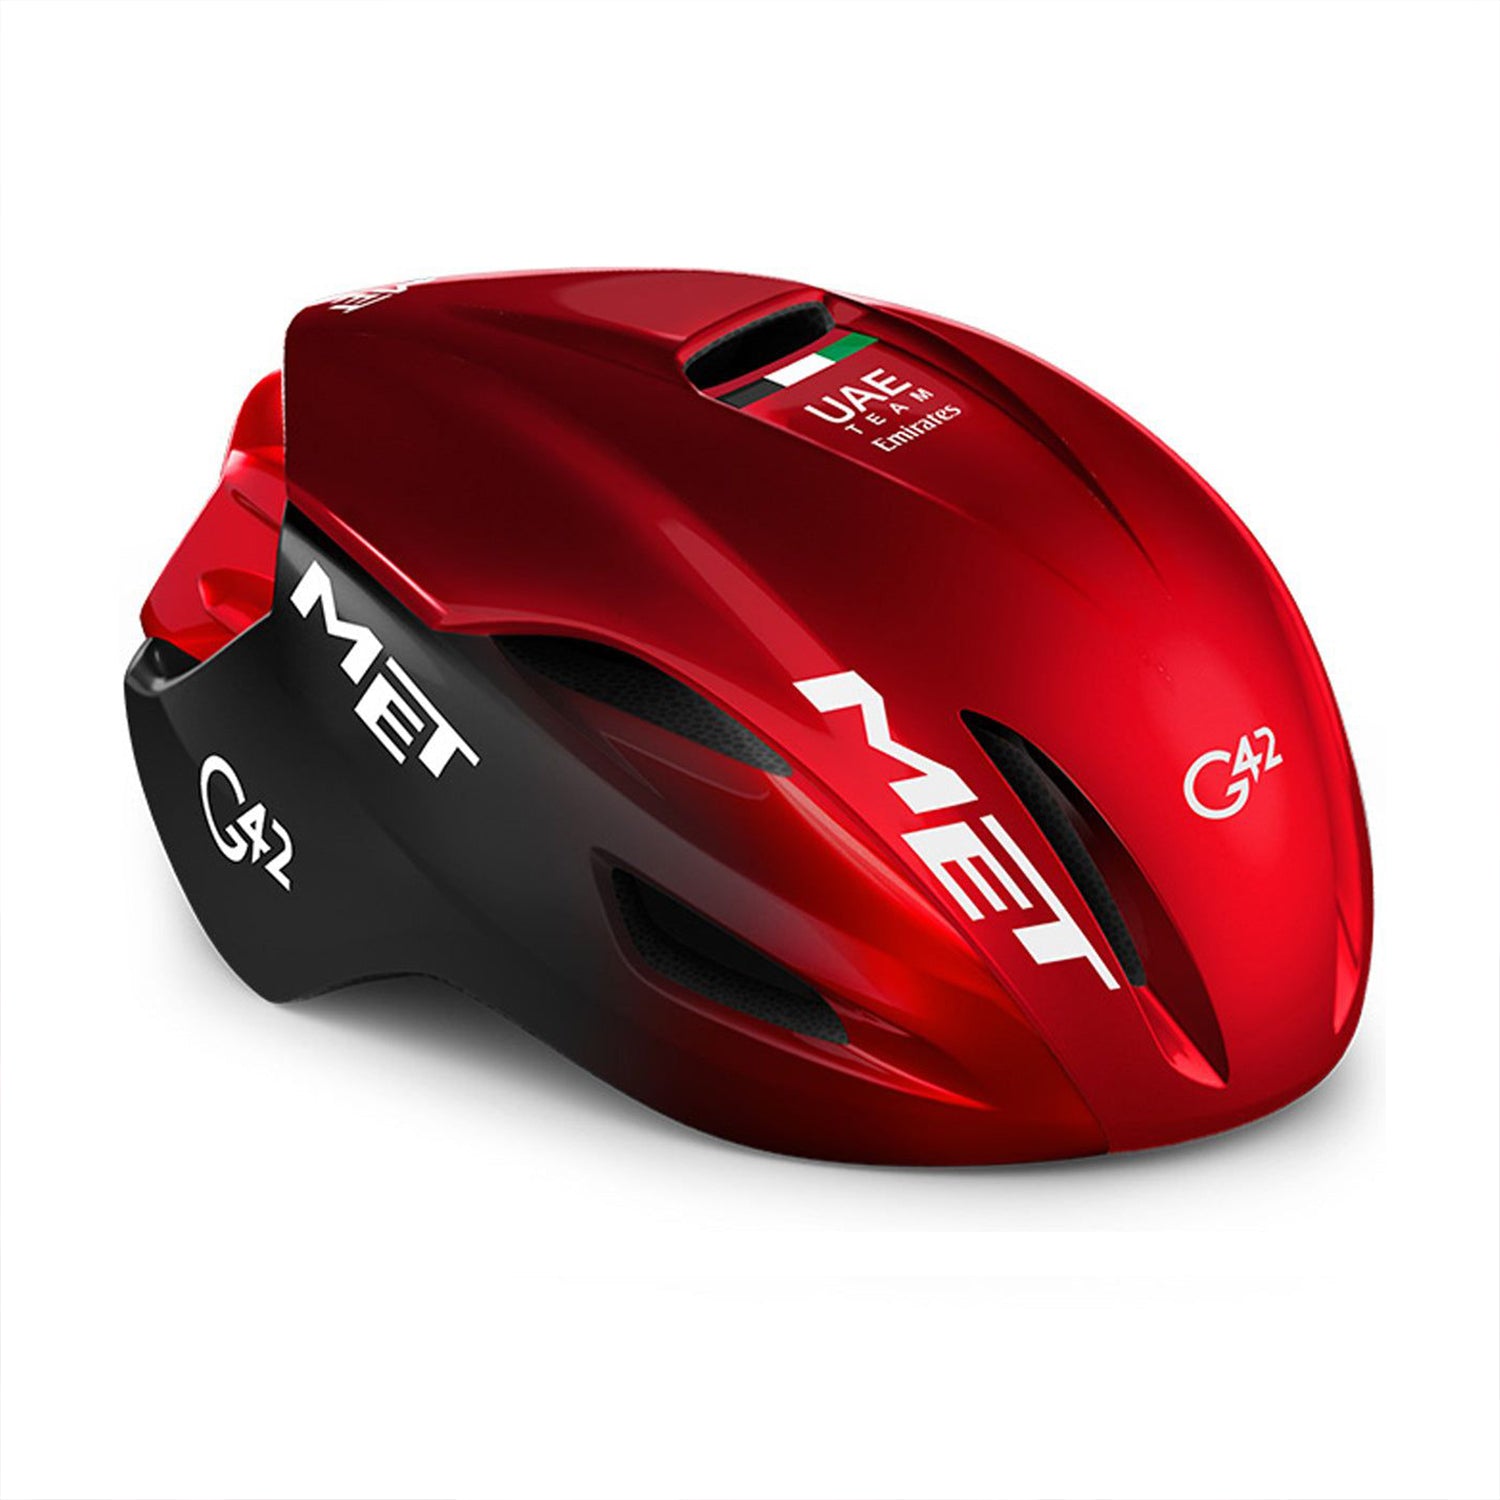 MET Manta Mips CE Uae Limited Edition 2021 | Cyclesouq.com